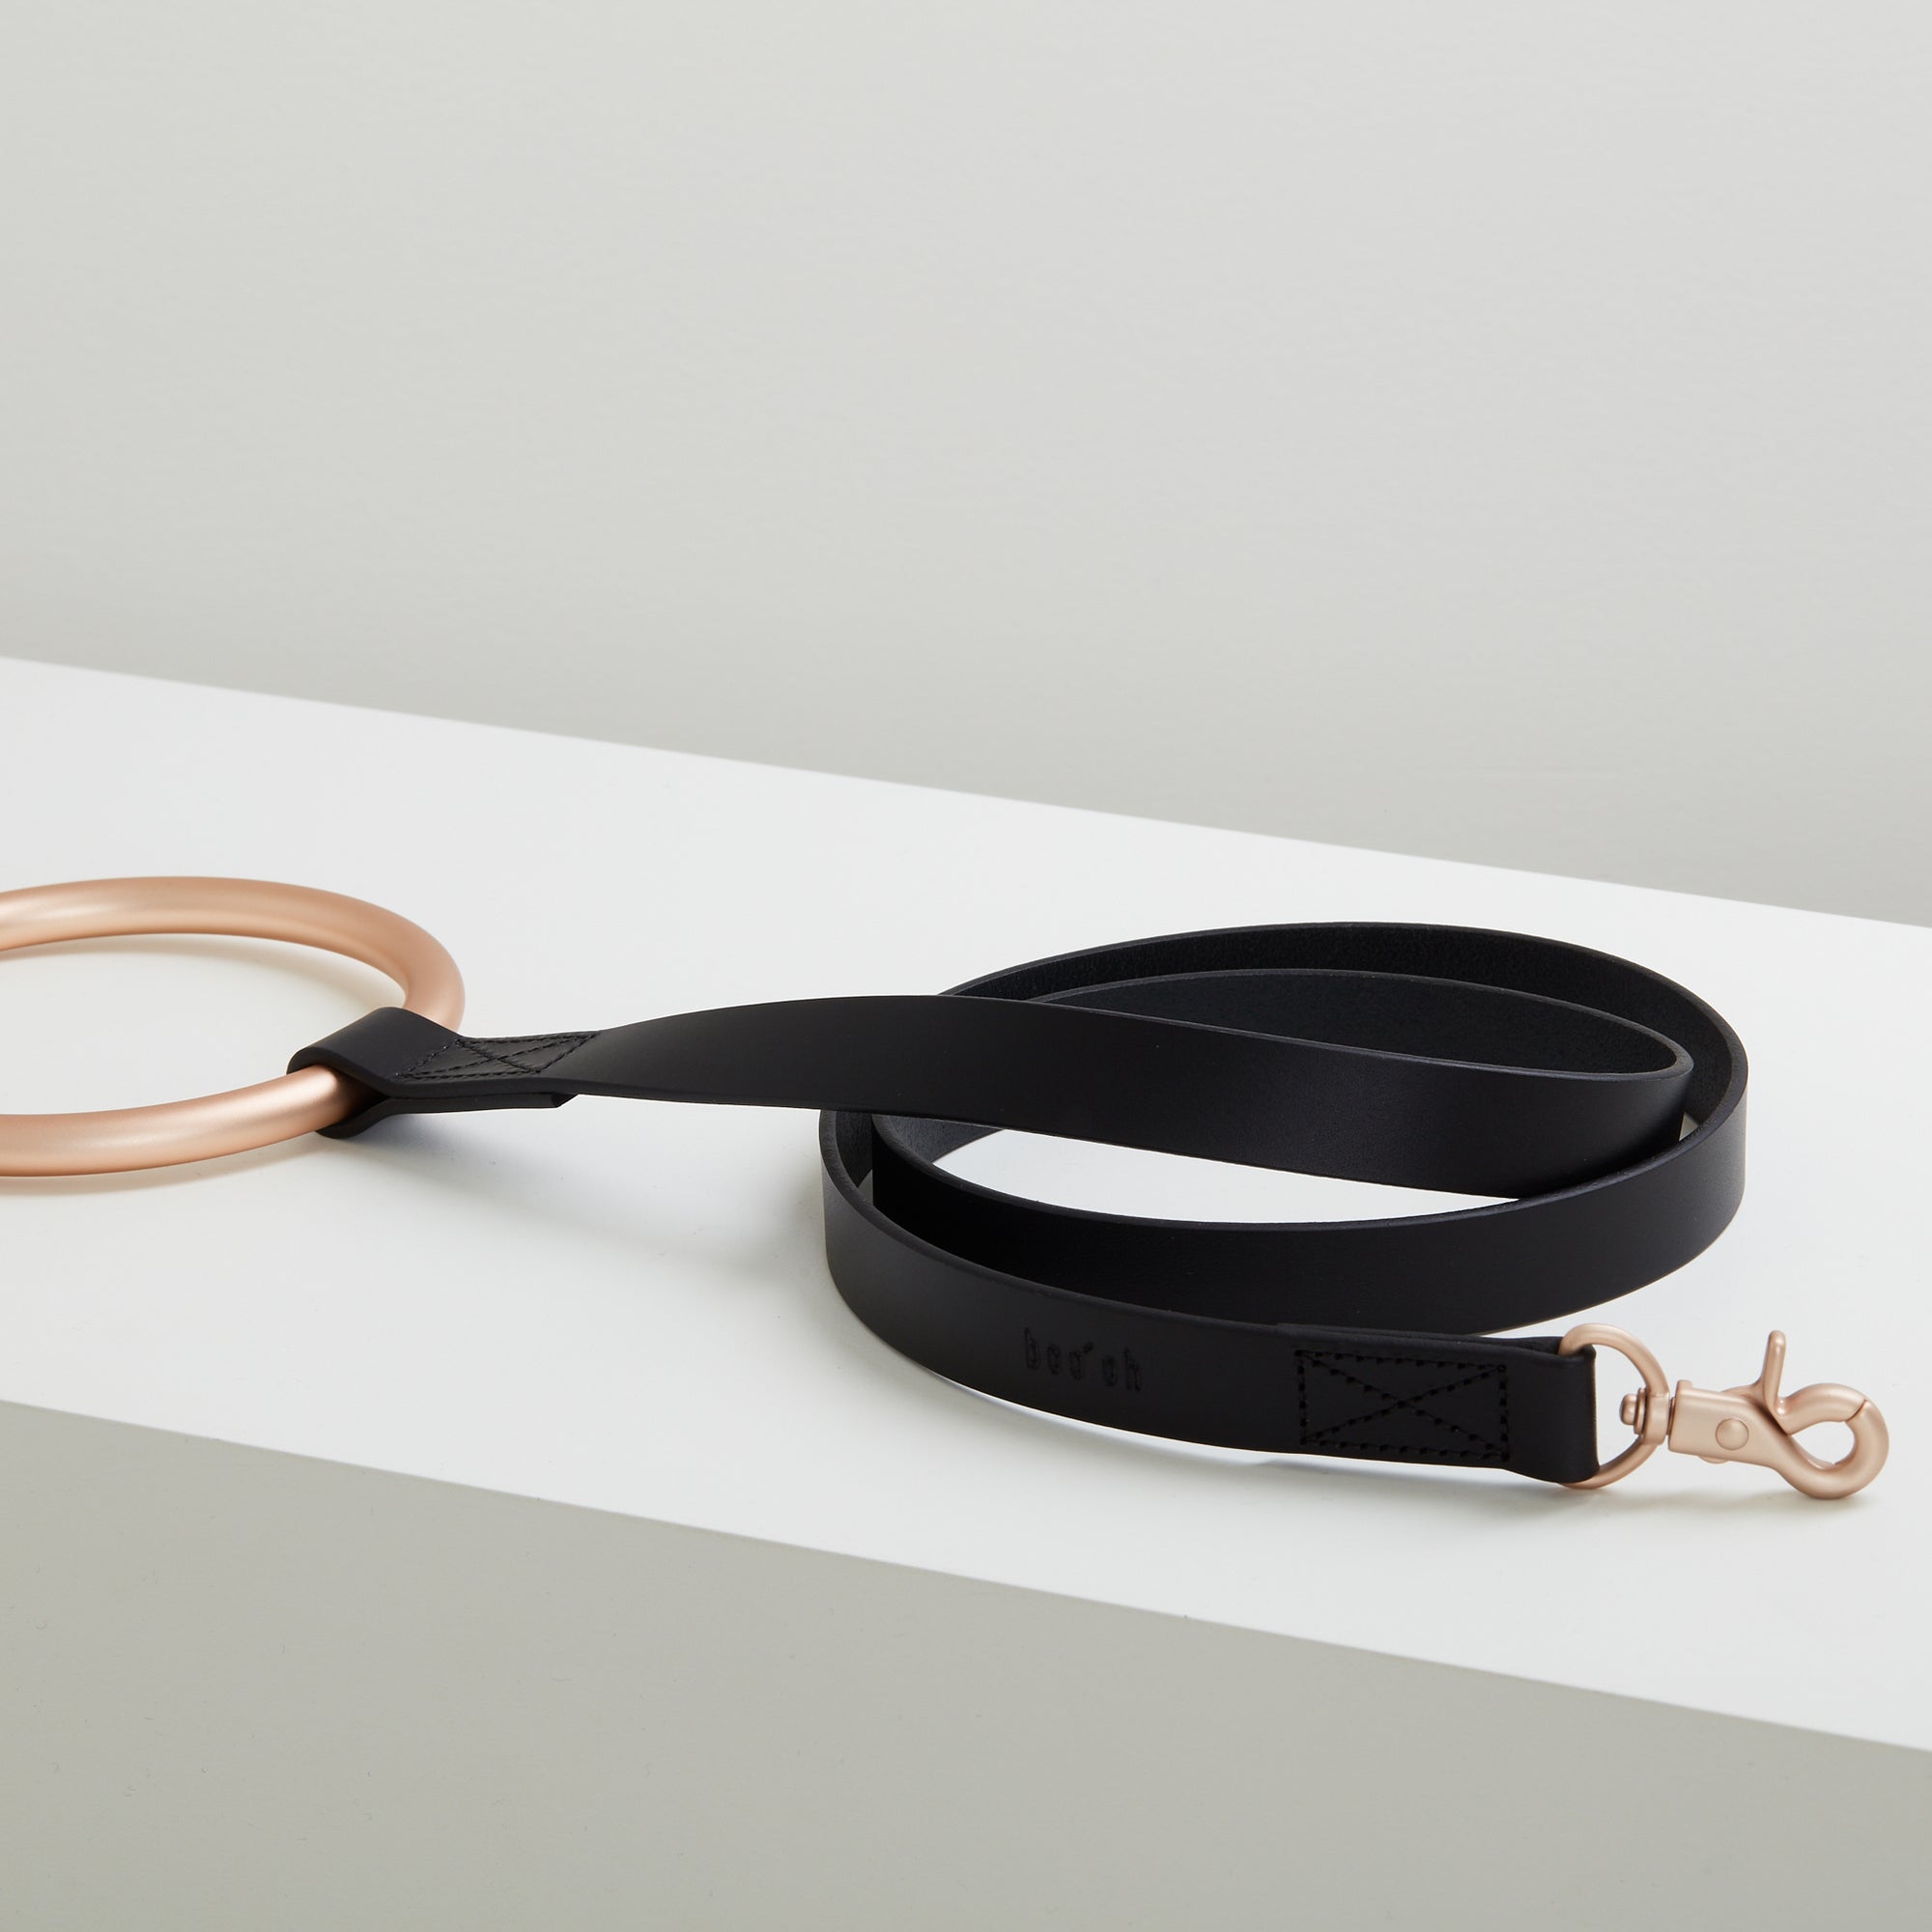 Lumi leash by Boo Oh in black + gold